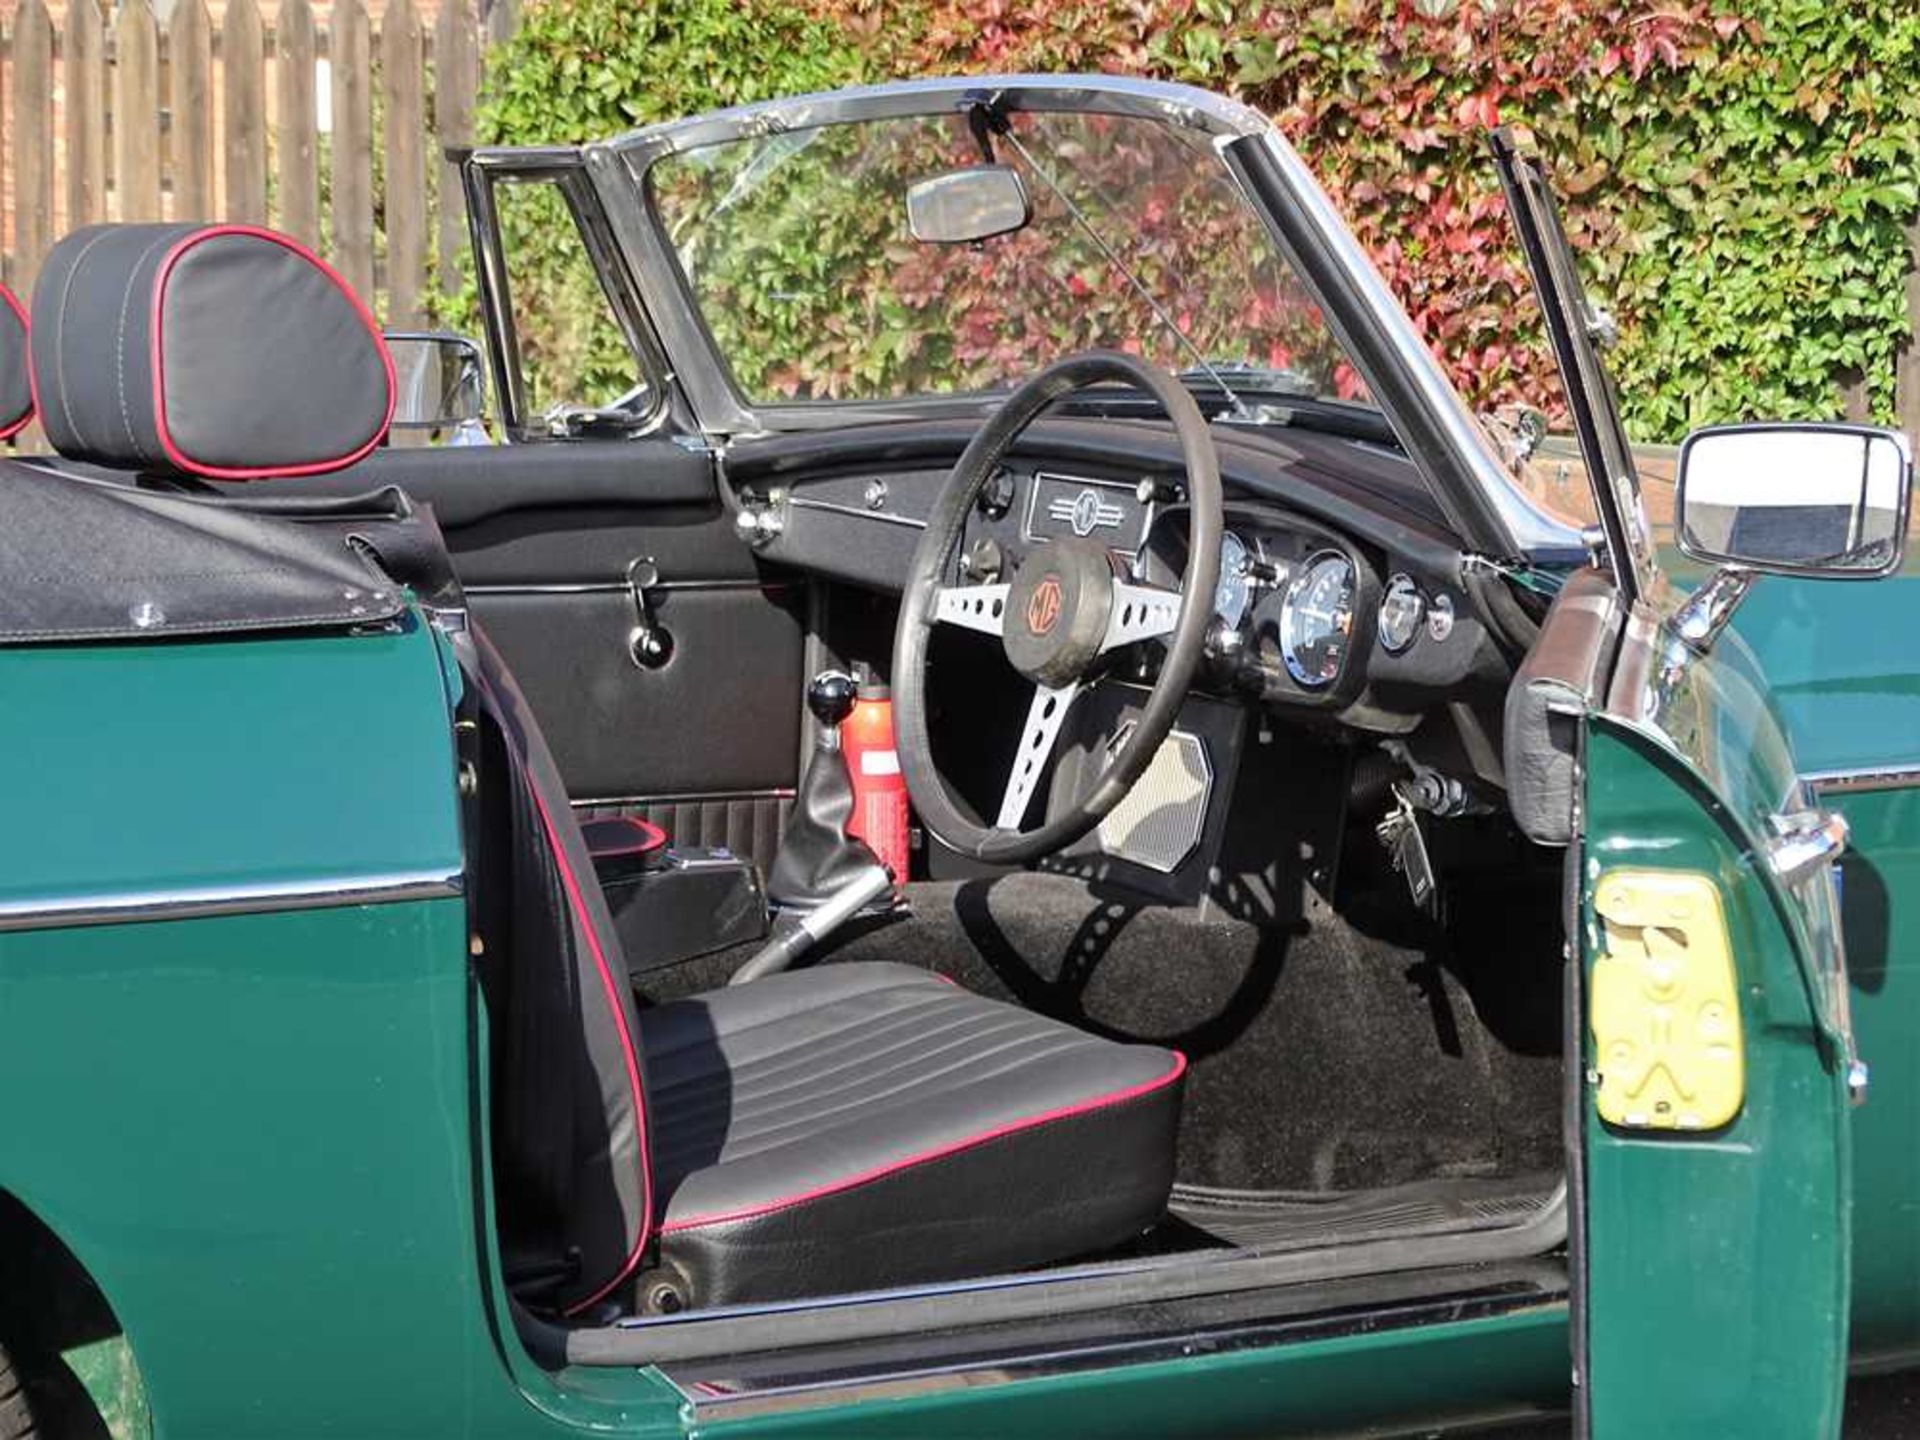 1971 MG B Roadster Restored at a cost of c.£33,000 - Image 16 of 43